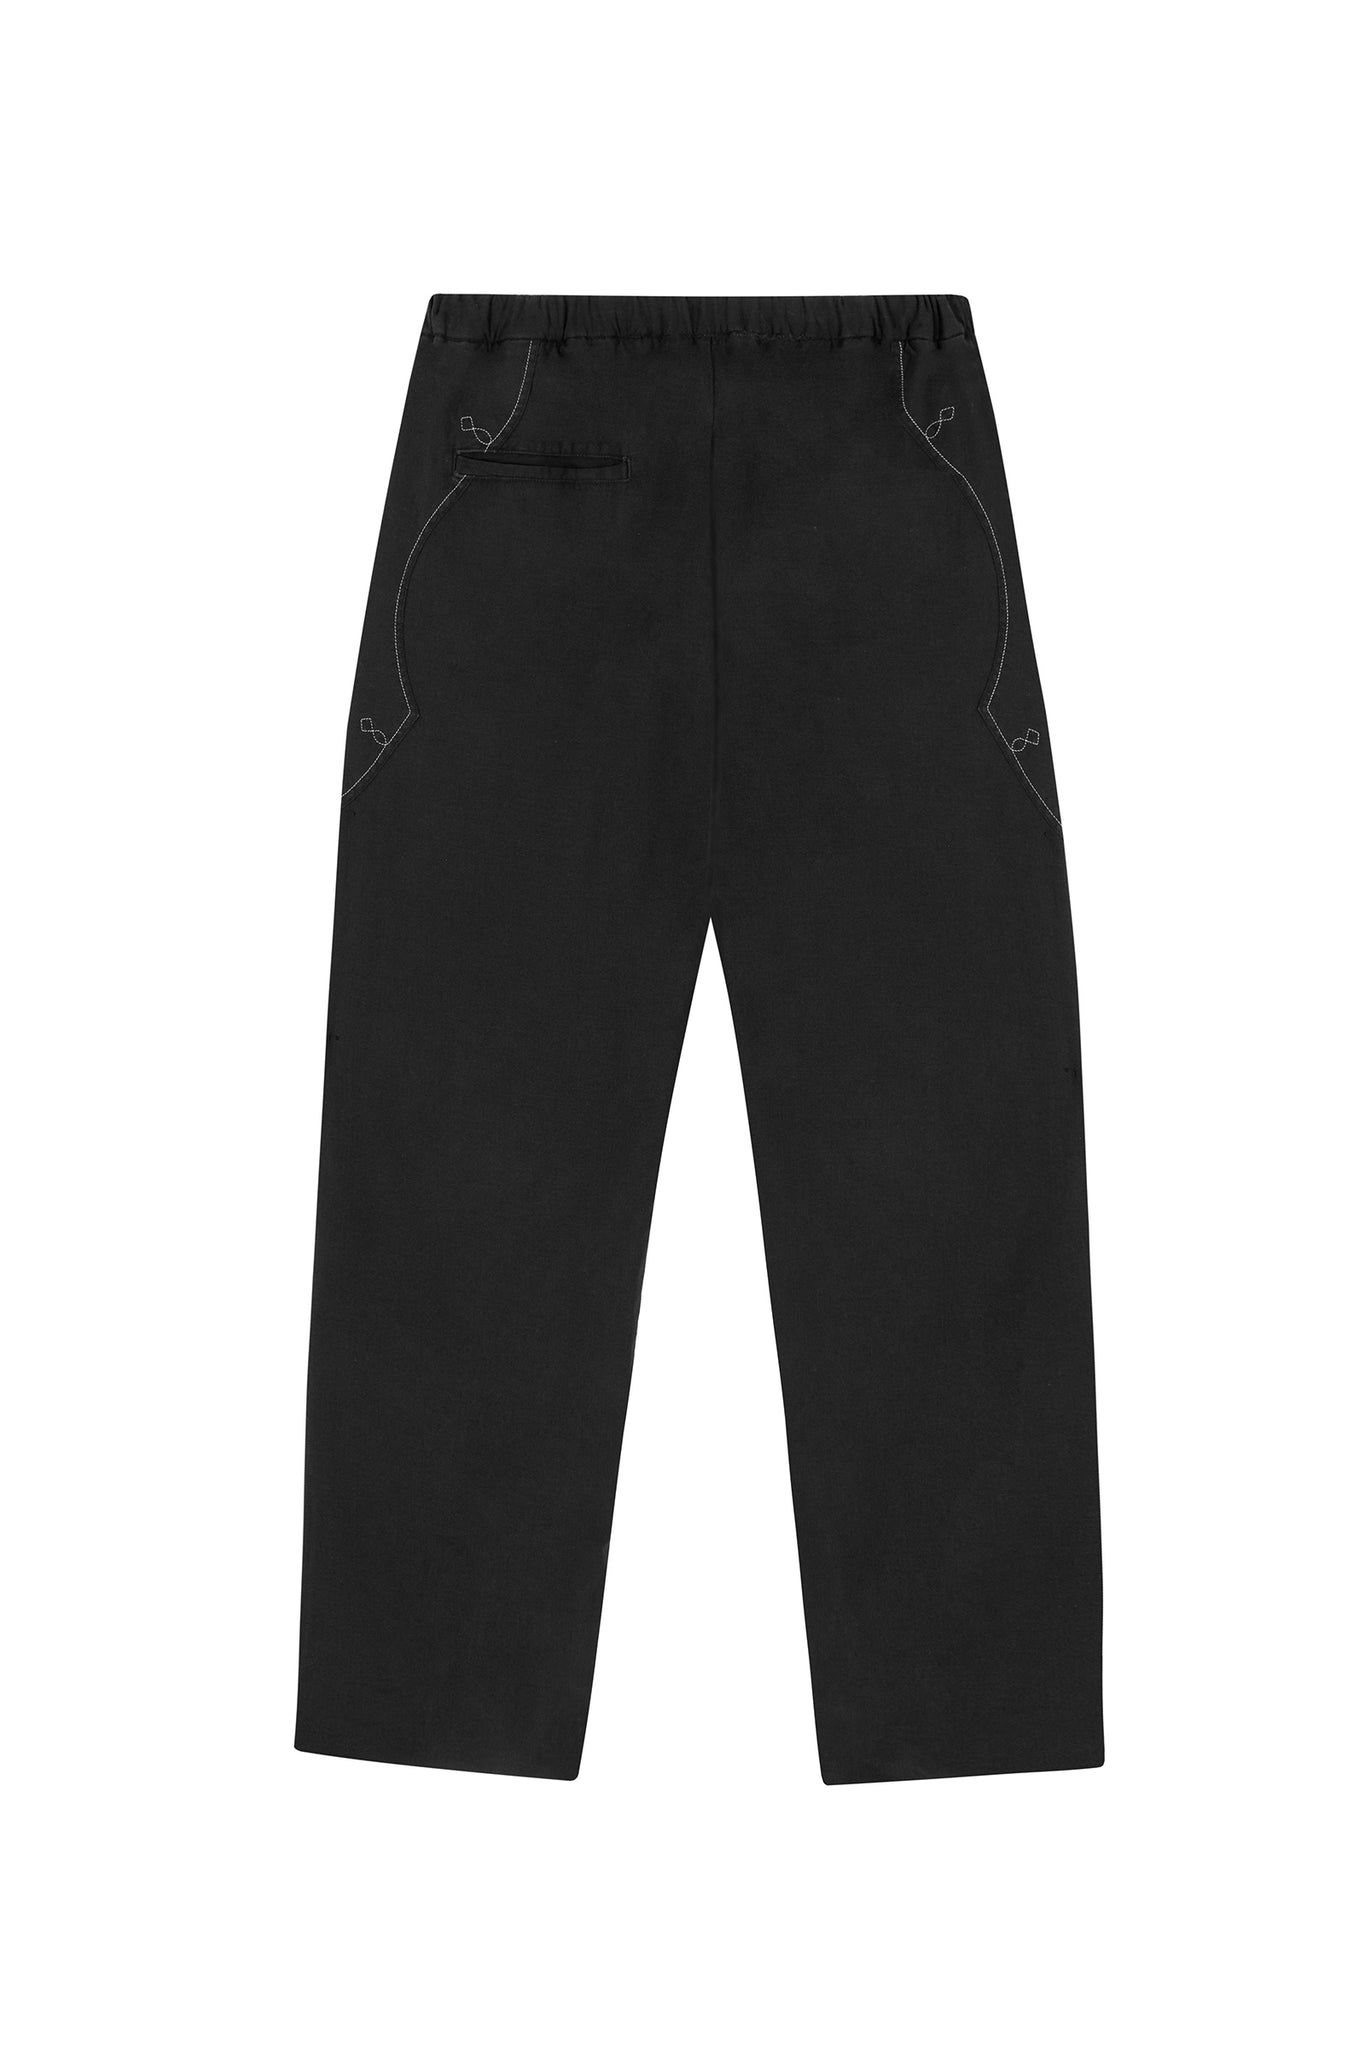 THE WESTERN CLIMBING PANTS IN BLACK